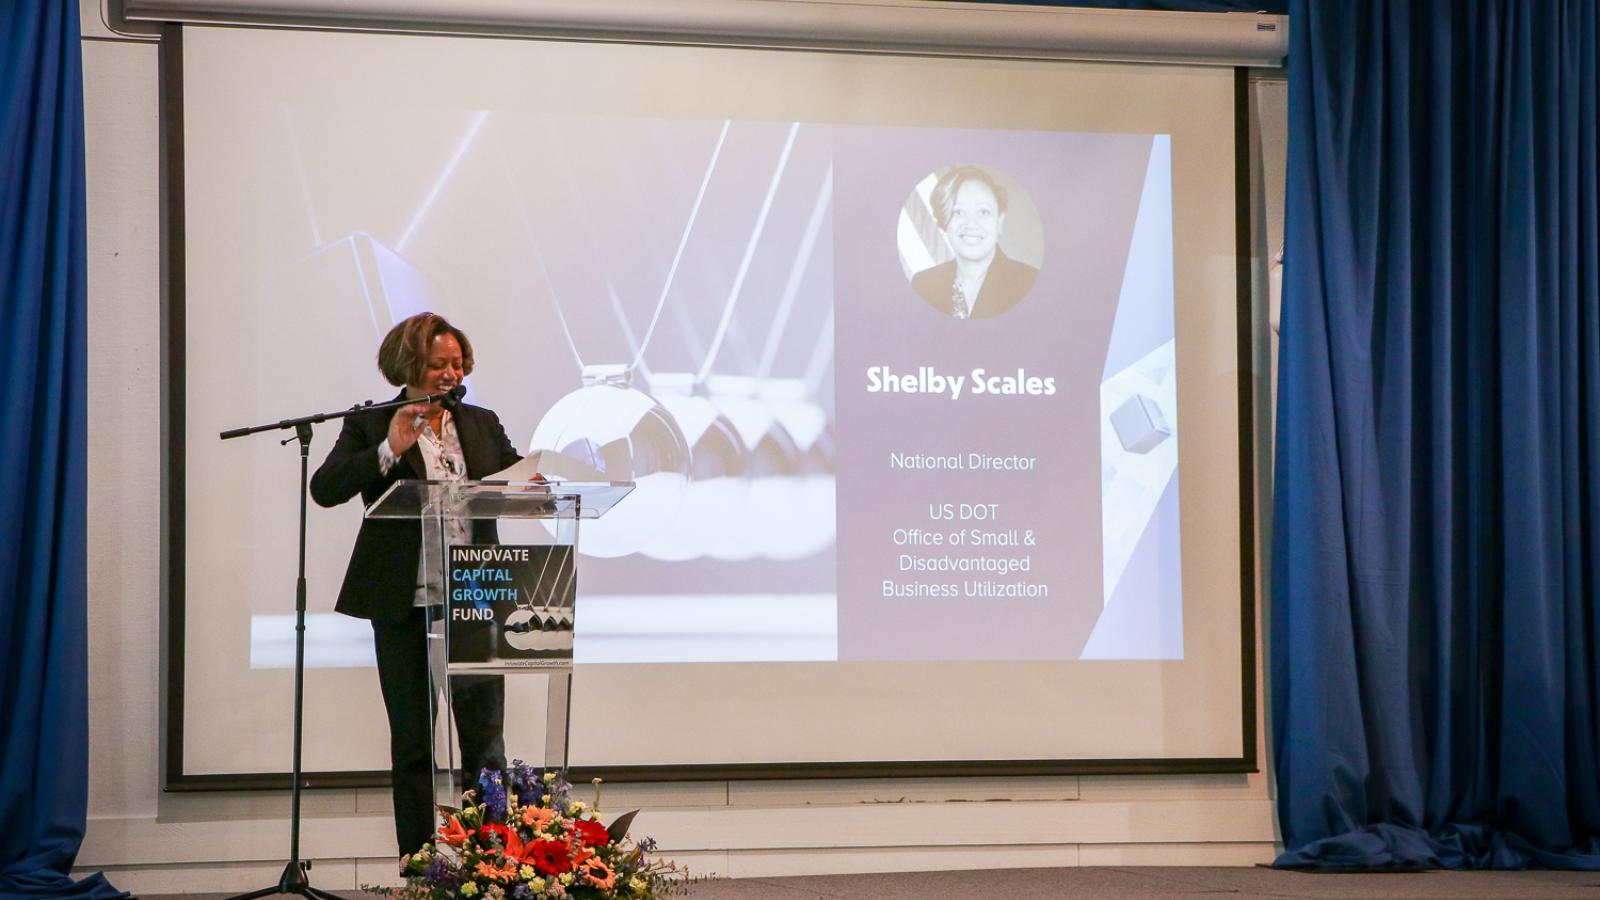 Shelby Scales speaks at Innovate Capital Growth Fund Launch